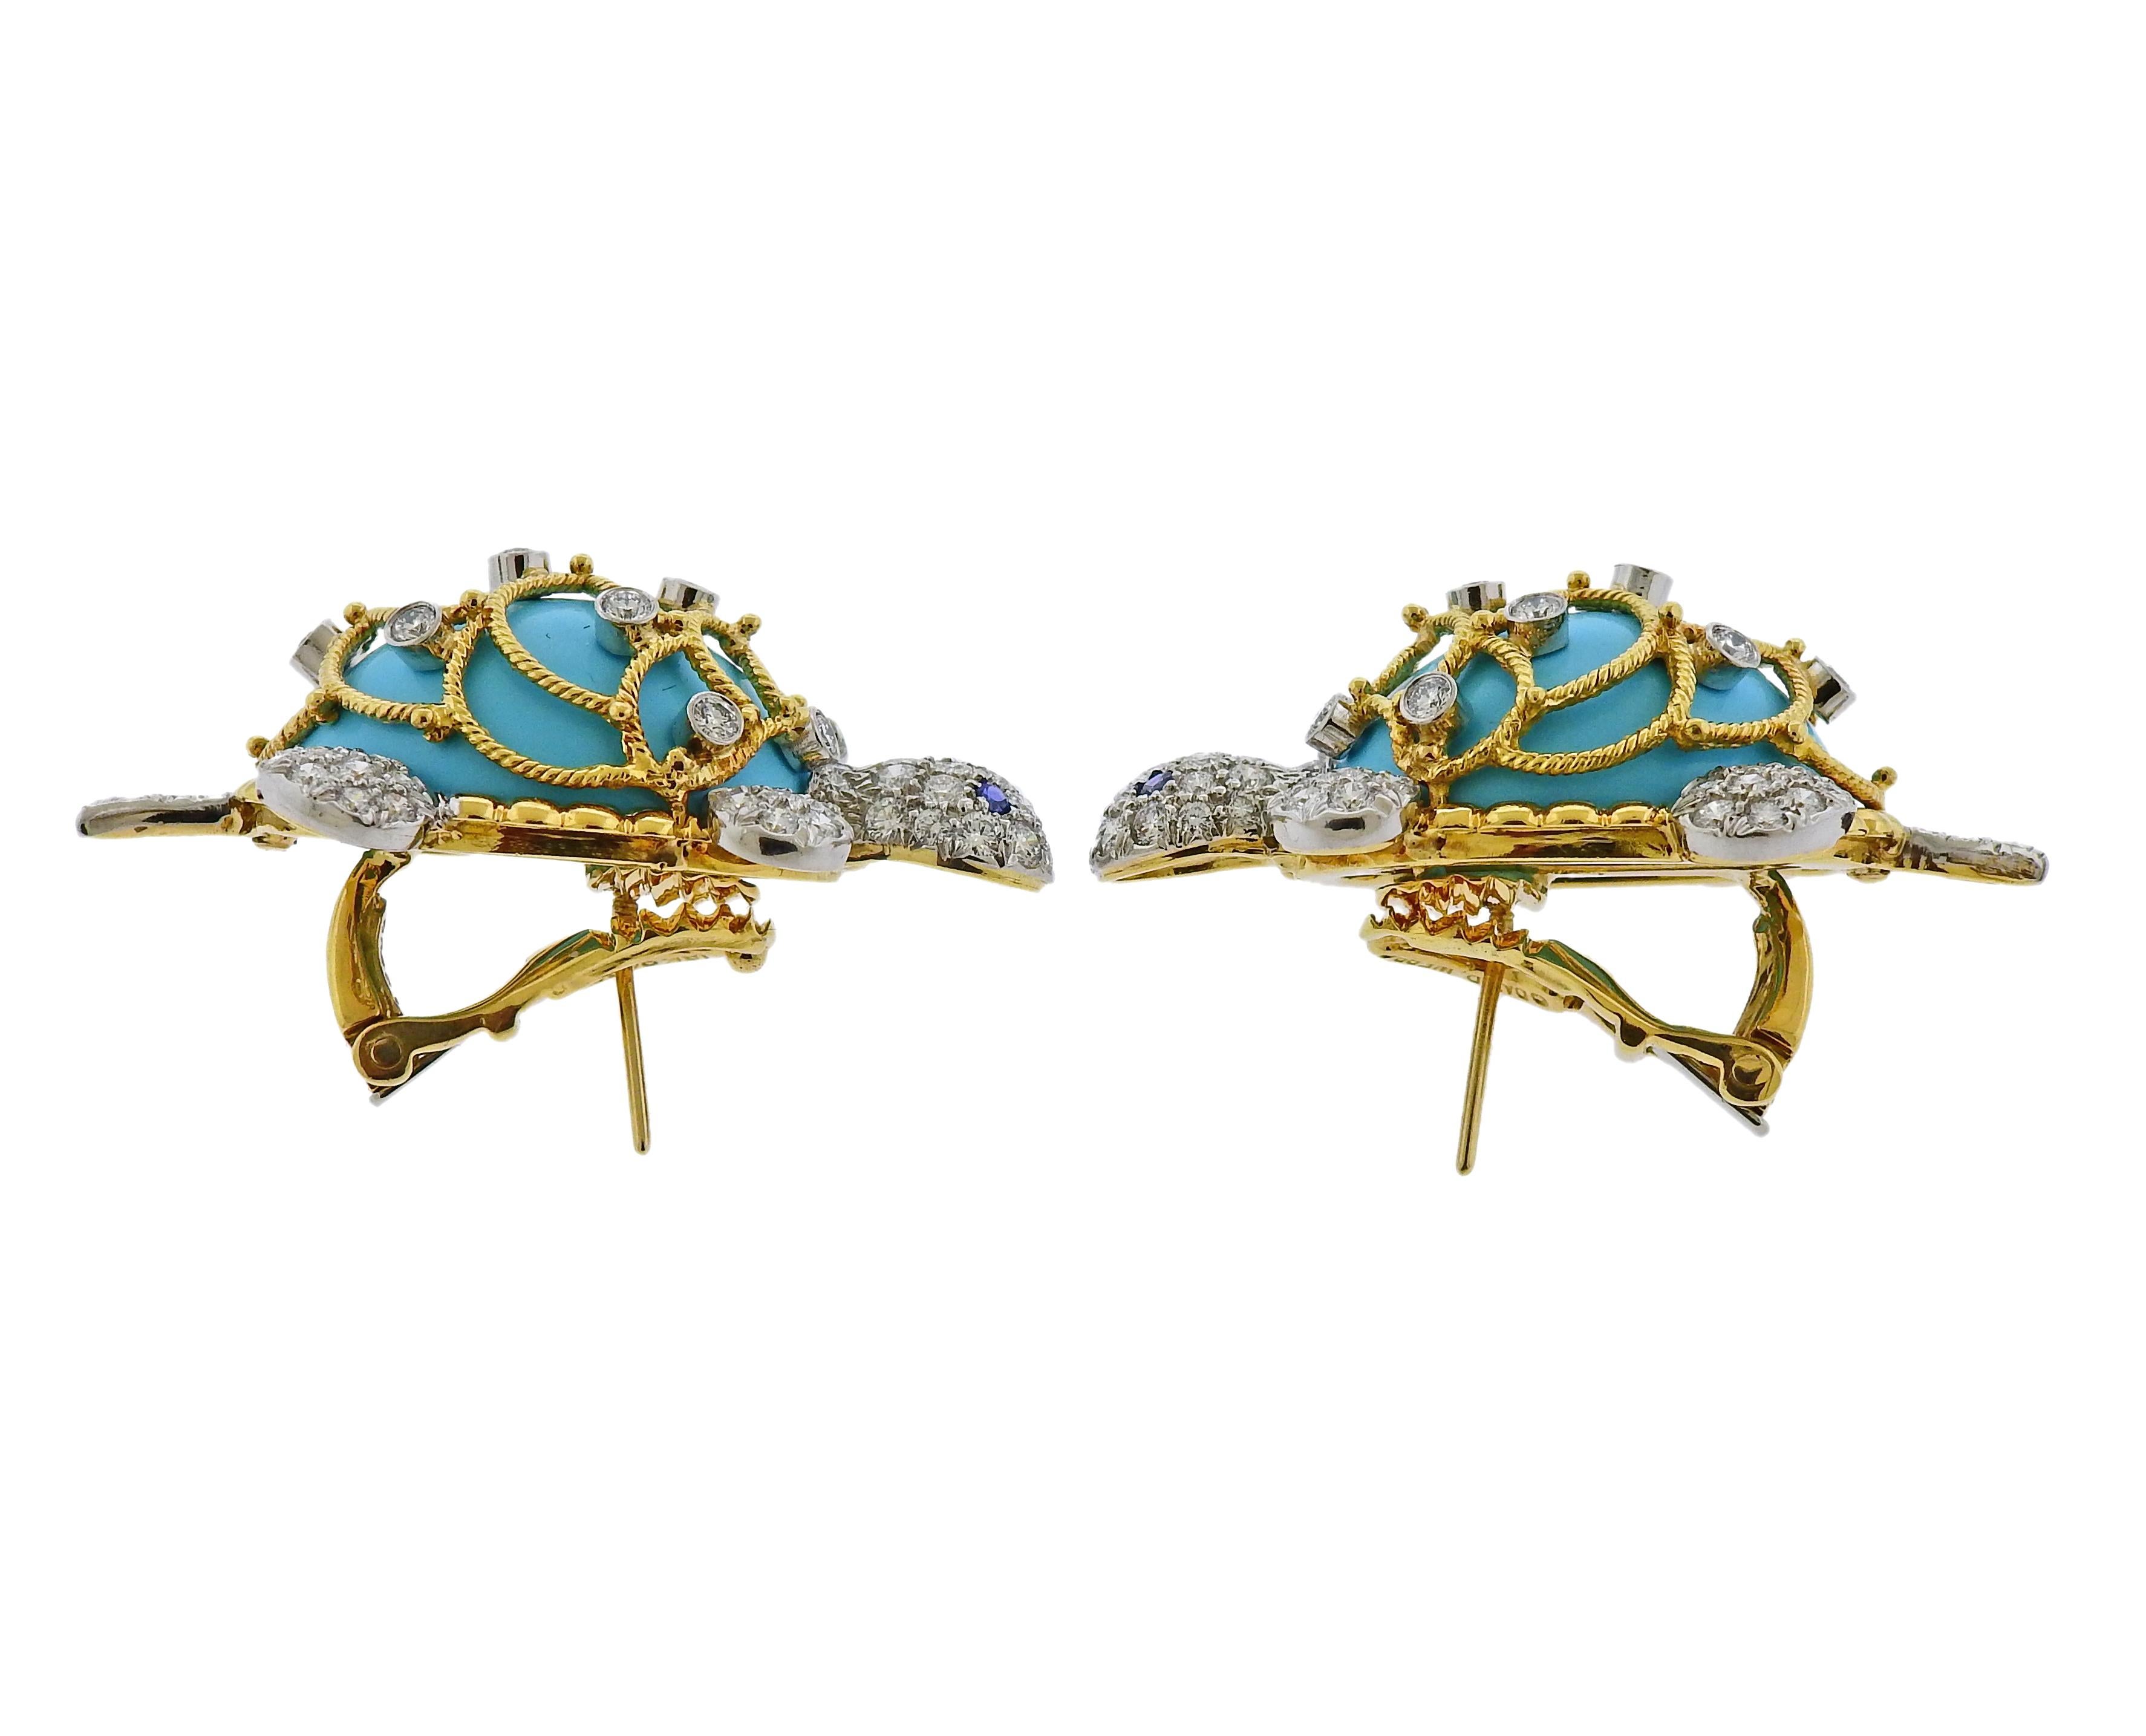 One of a kind David Webb turquoise  turtle earrings in platinum and 18K yellow gold set with 2.40ctw of H - color; VS/SI1 - clarity diamonds and sapphire eyes. Earrings measure 40mm x 25mm. Weight is 45.5 grams. Marked: GS421, David Webb 18k 900PT. 